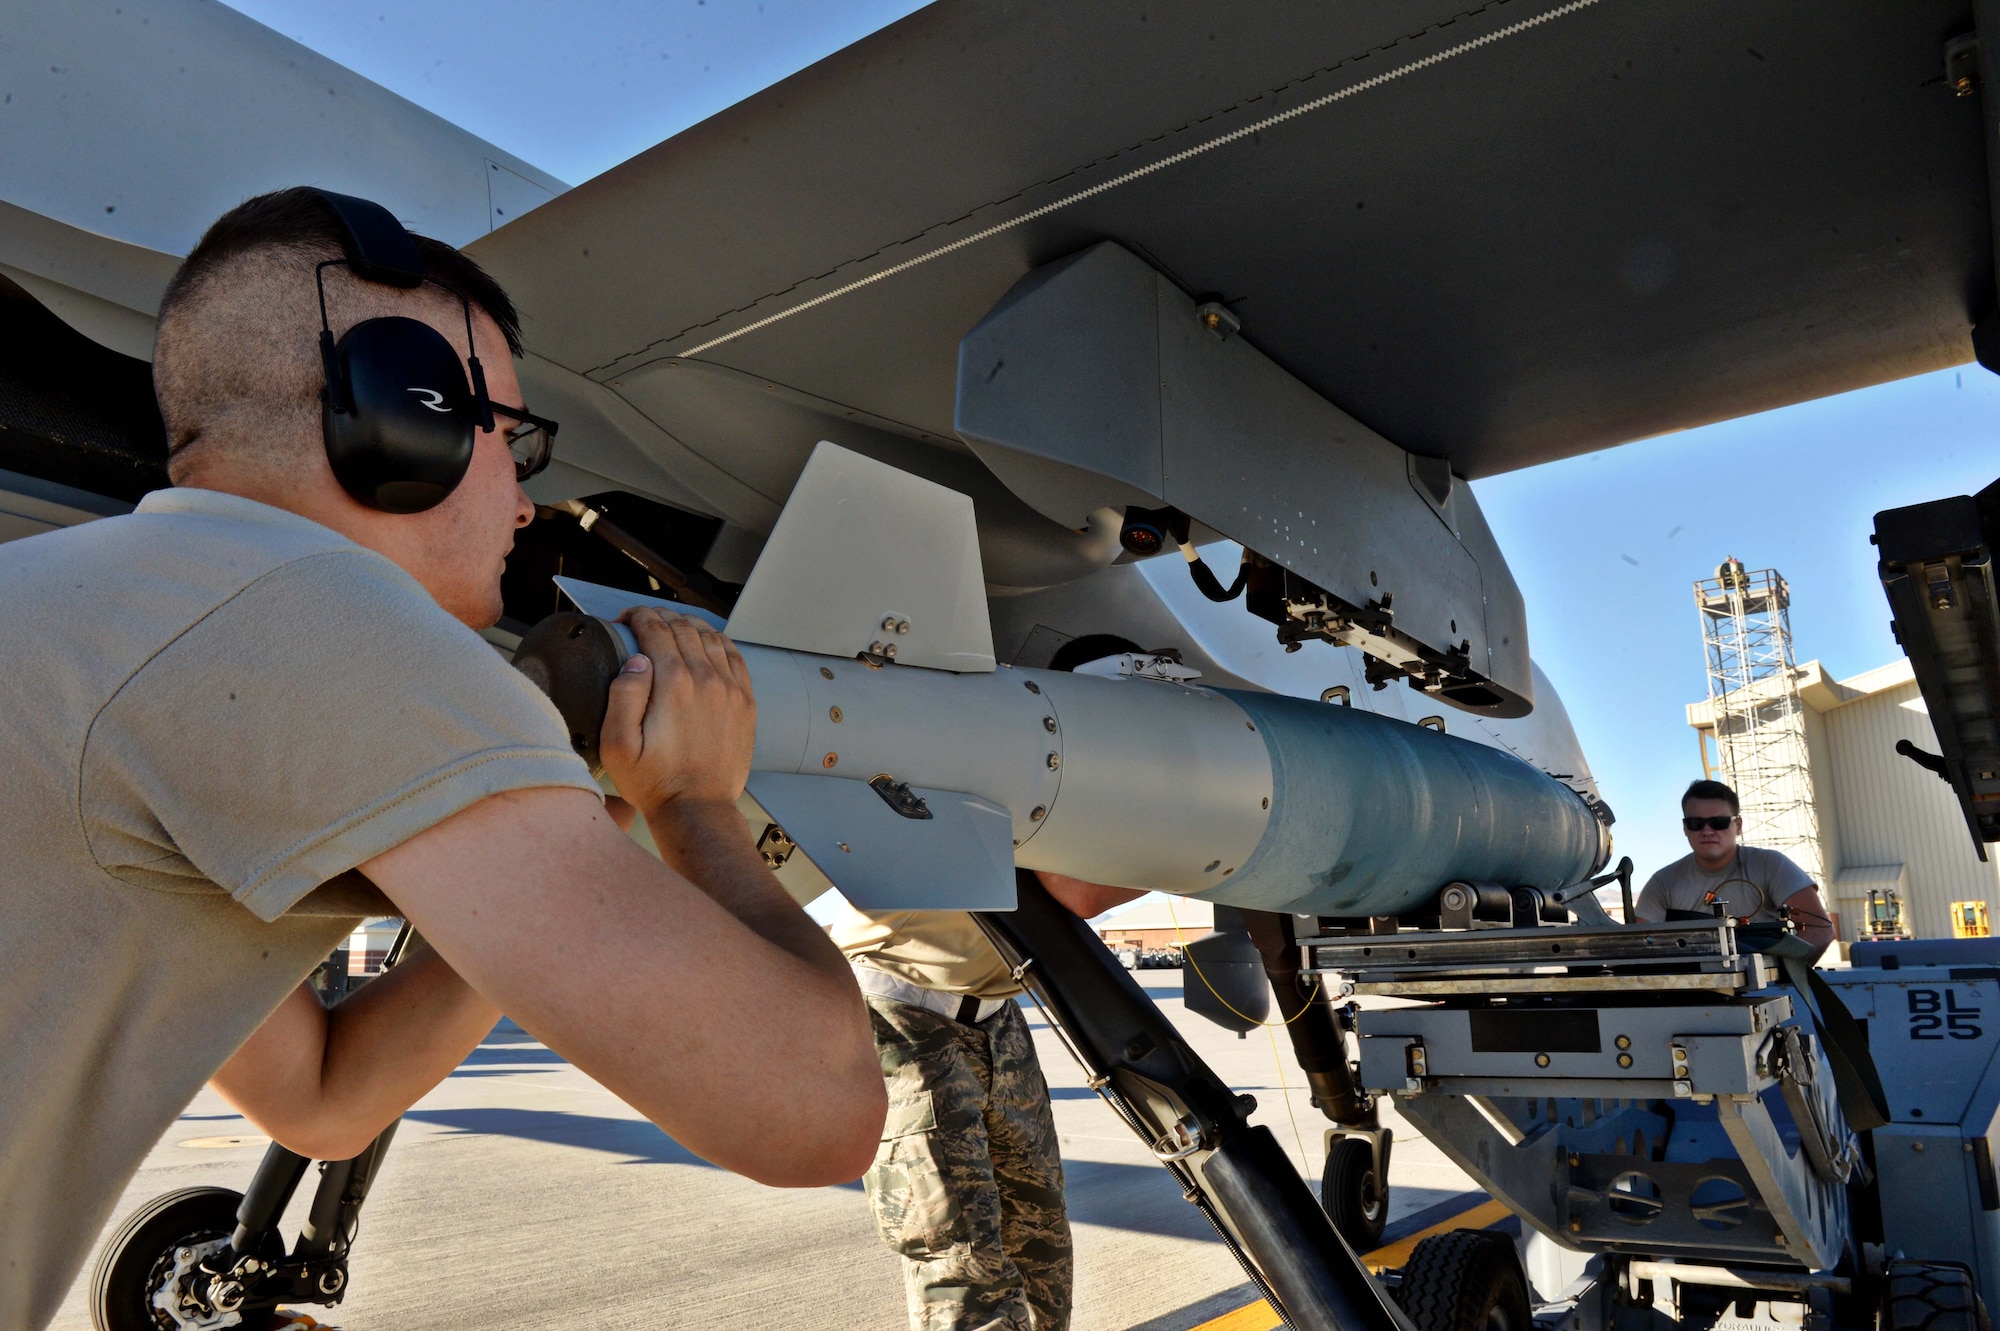 Airmen assigned to the 432nd Aircraft Maintenance Squadron weapons crew load an inert munition on an MQ-9 Reaper weapons pylon in support of Red Flag 16-3 July 20, 2016, at Creech Air Force Base, Nevada. Airmen from the 432nd Wing/432nd Air Expeditionary Wing fly, maintain and support both the MQ-1 Predators and MQ-9 Reapers in Red Flag operations. (U.S. Air Force photo by Airman 1st Class Kristan Campbell/Released)